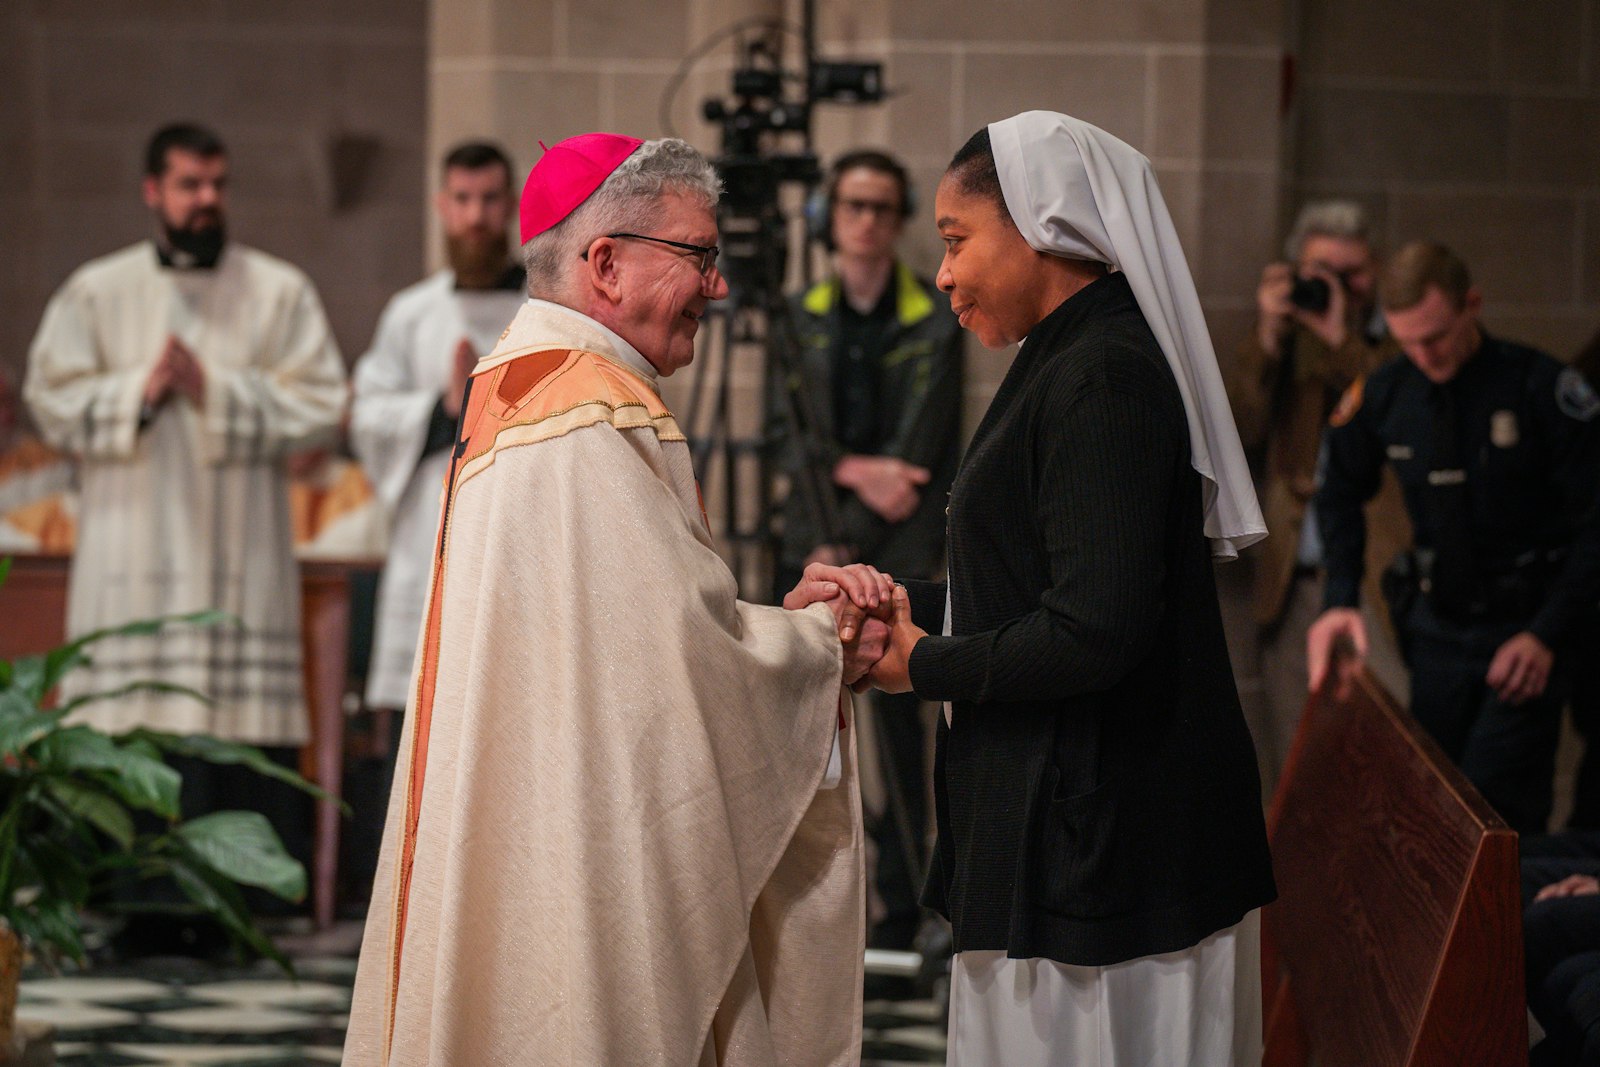 Bishop Monforton greets representatives of the Archdiocese of Detroit for the first time as a new auxiliary bishop.